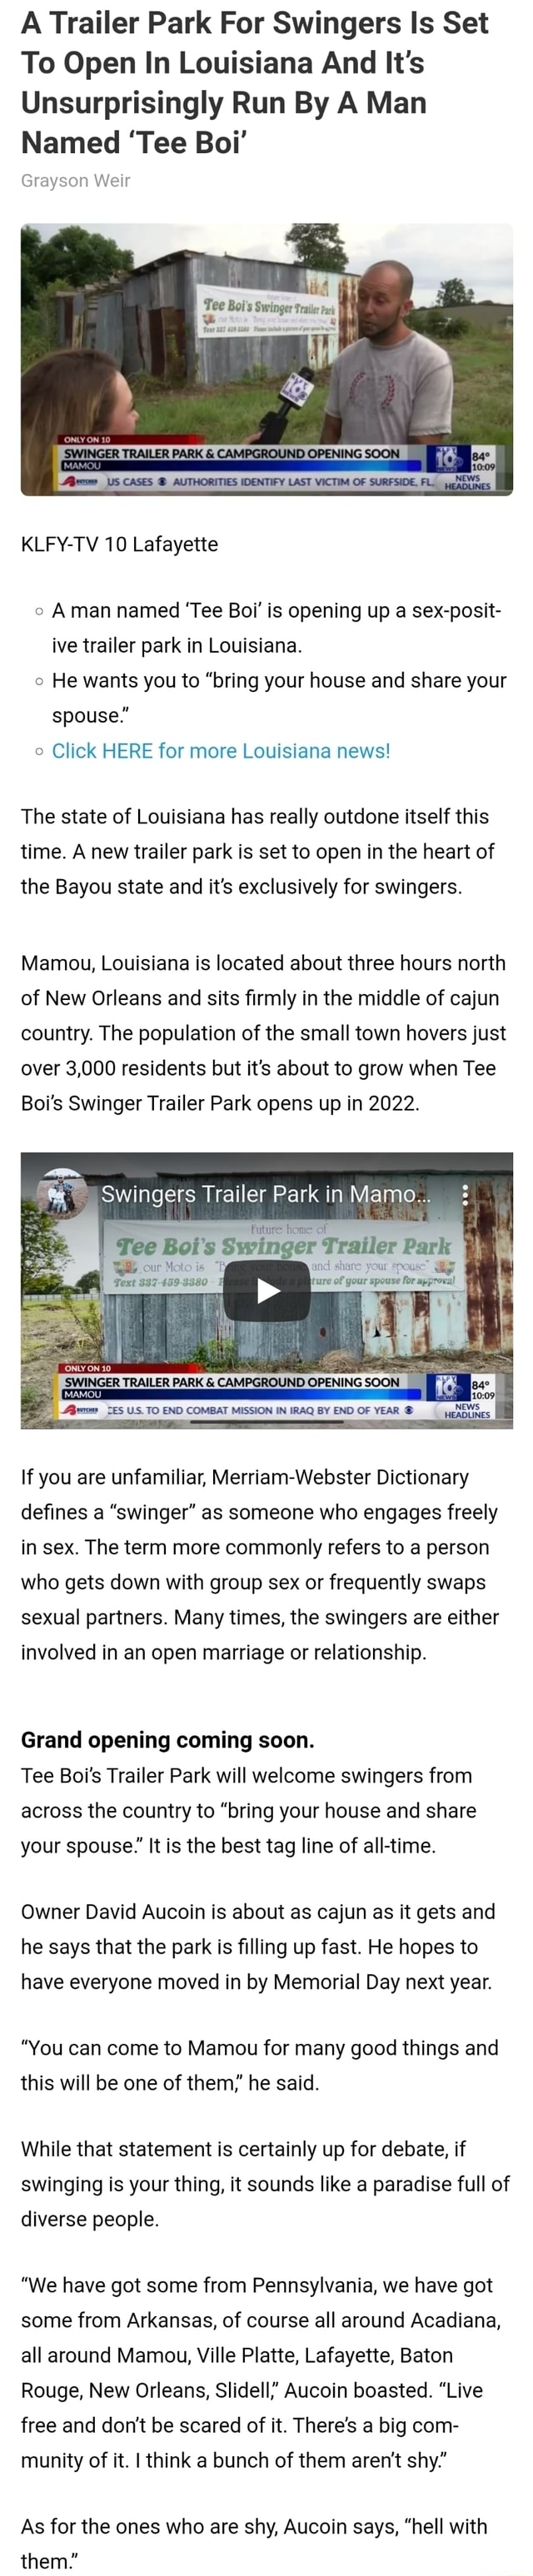 A Trailer Park For Swingers Is Set To Open In Louisiana And Its Unsurprisingly Run By A Man Named Tee Boi Grayson Weir Tee Bois Swinger Trailer KLFY-TV 10 Lafayette SWINGER TRAILERS CAME GROUND IS CASES AUTHORITIES IDENTIFY LAST